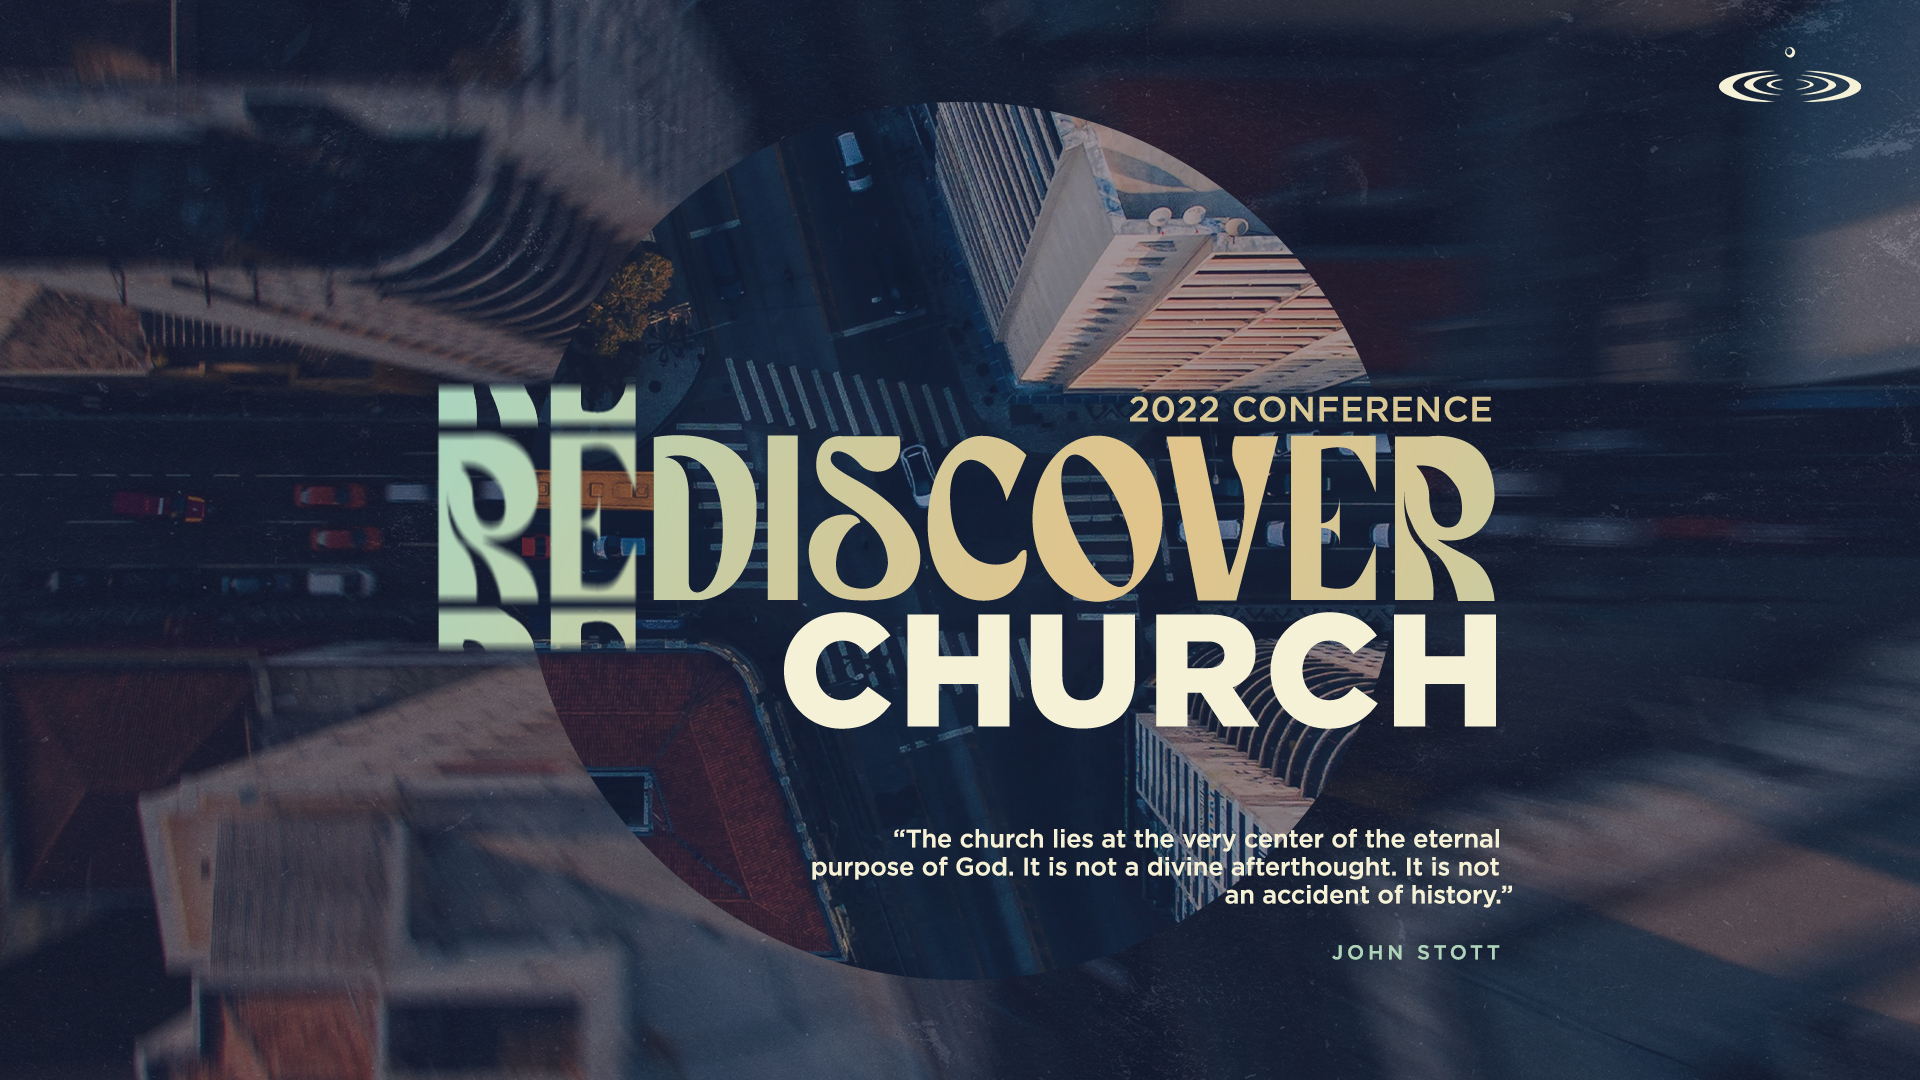 Rediscover Church – Part 2: The Church Scattered